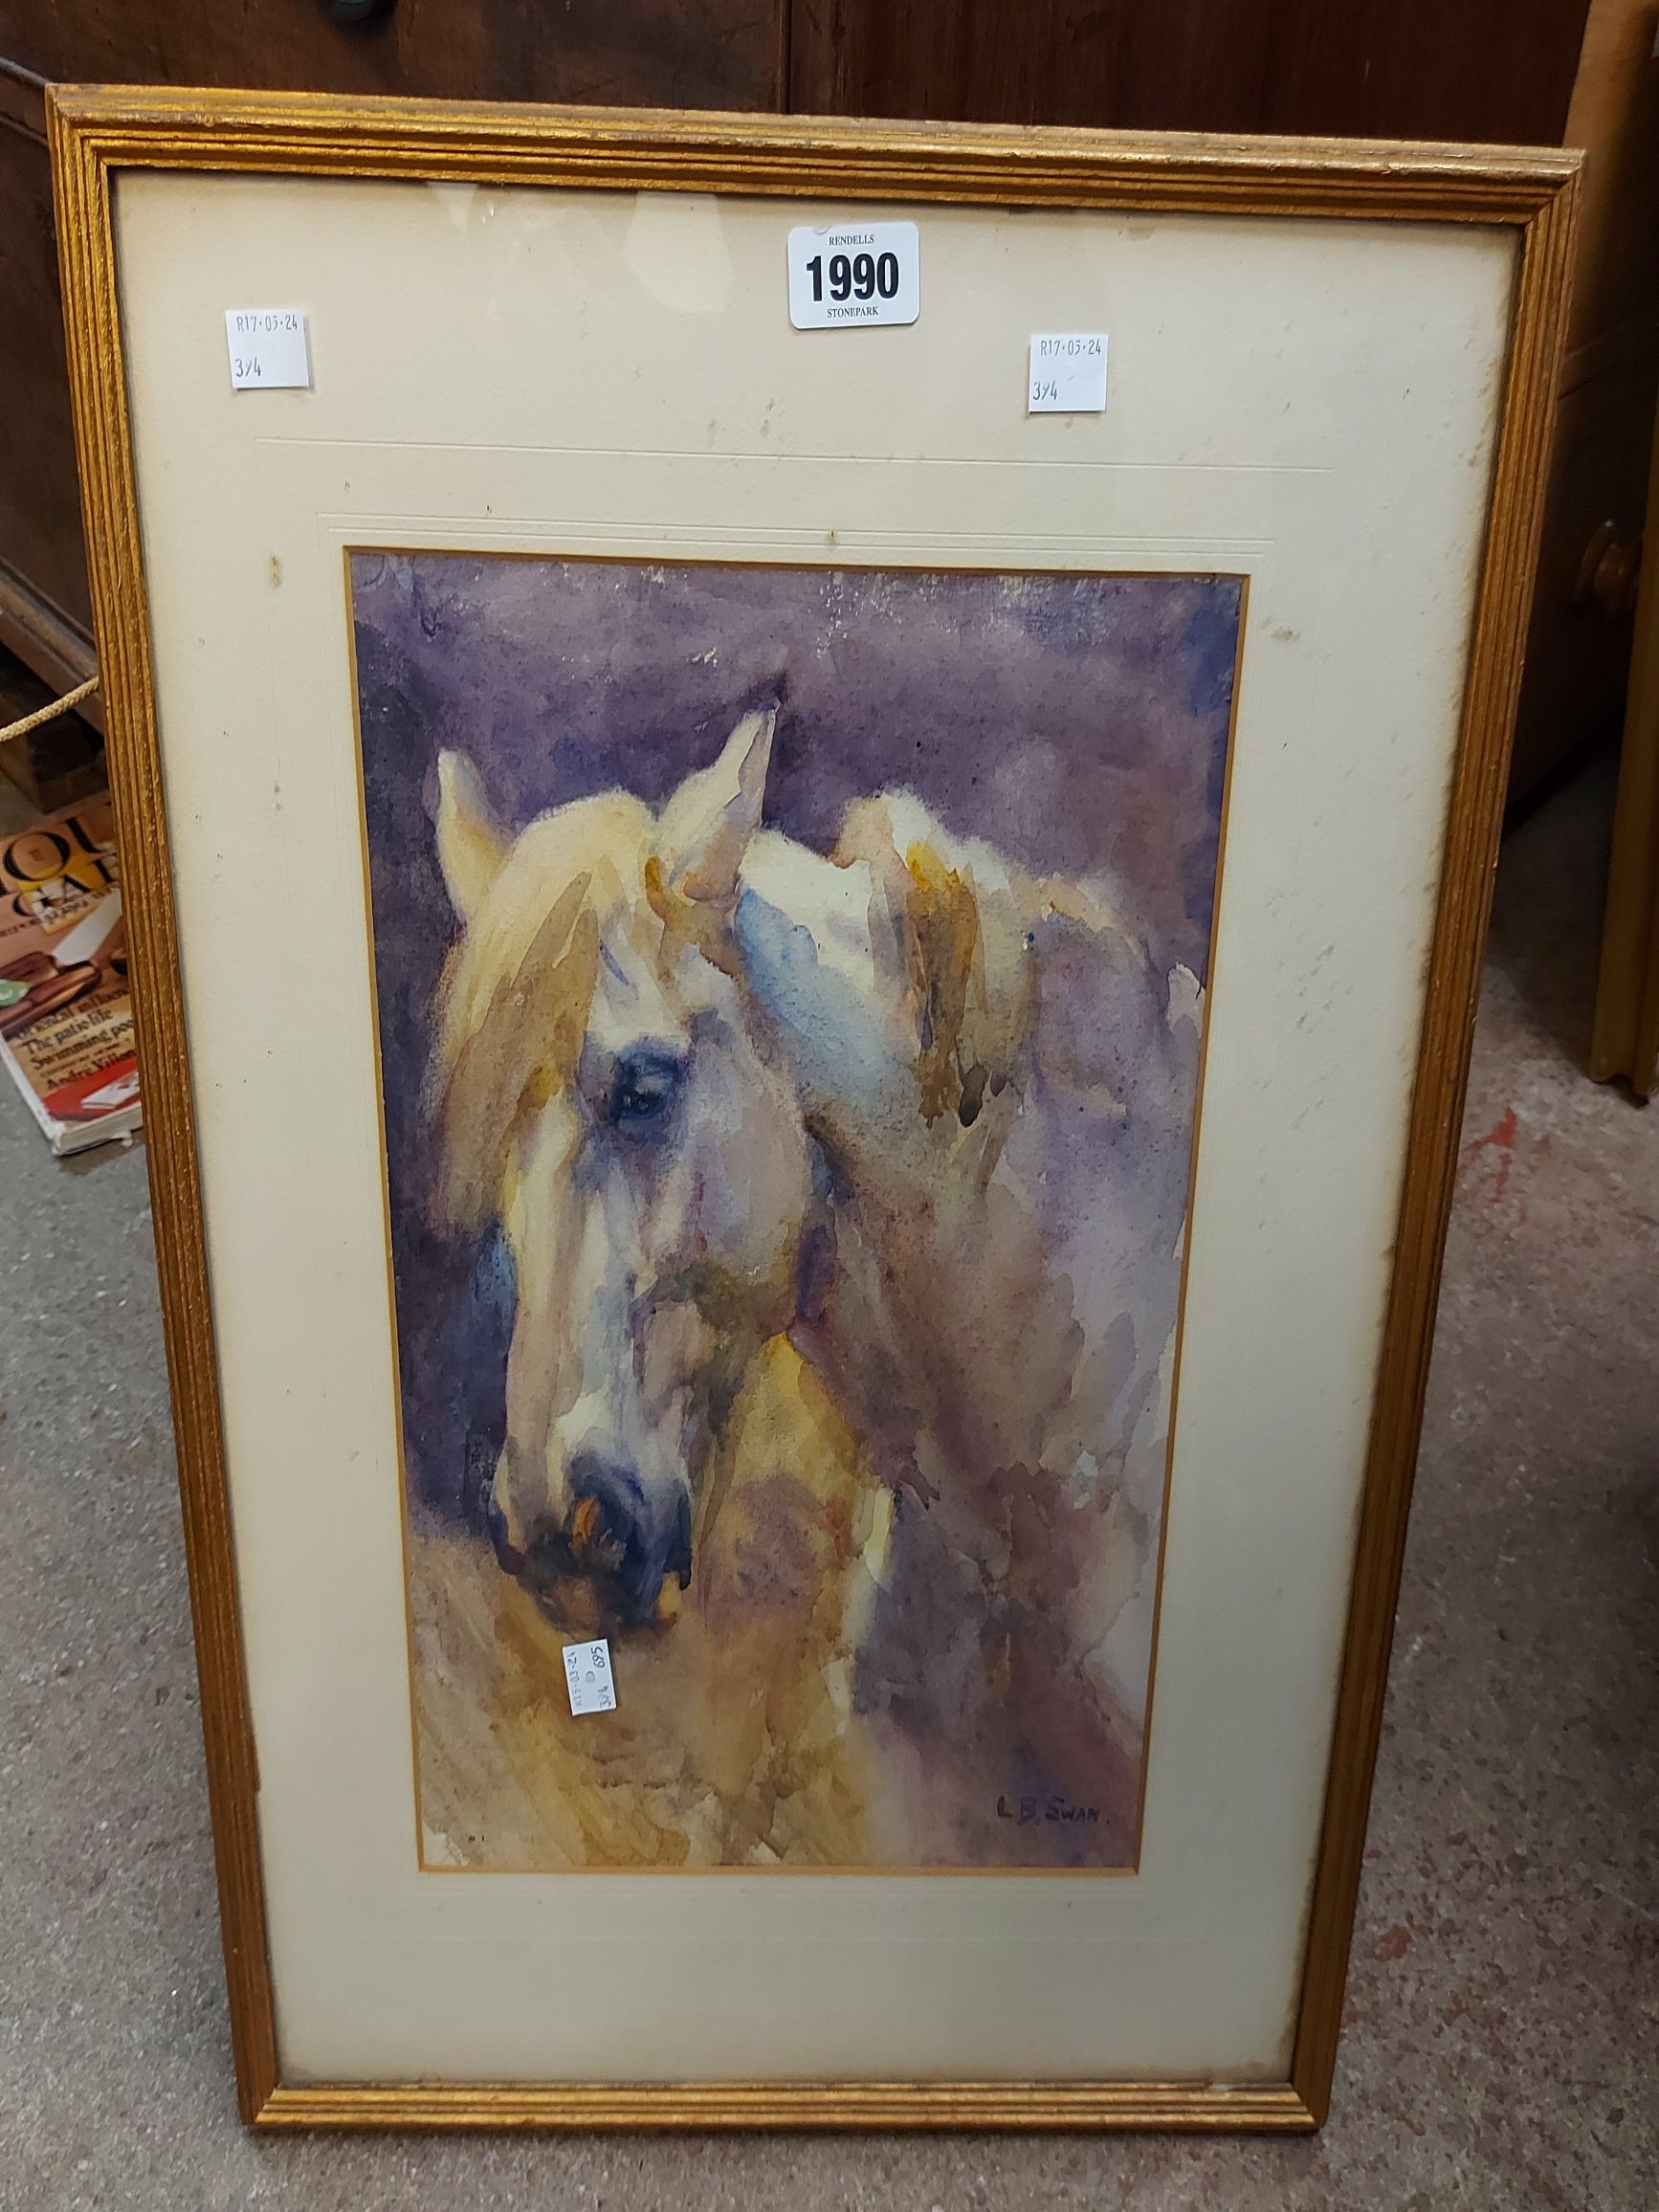 †L.B. Ewan: a framed watercolour study of a horse - signed and with details verso